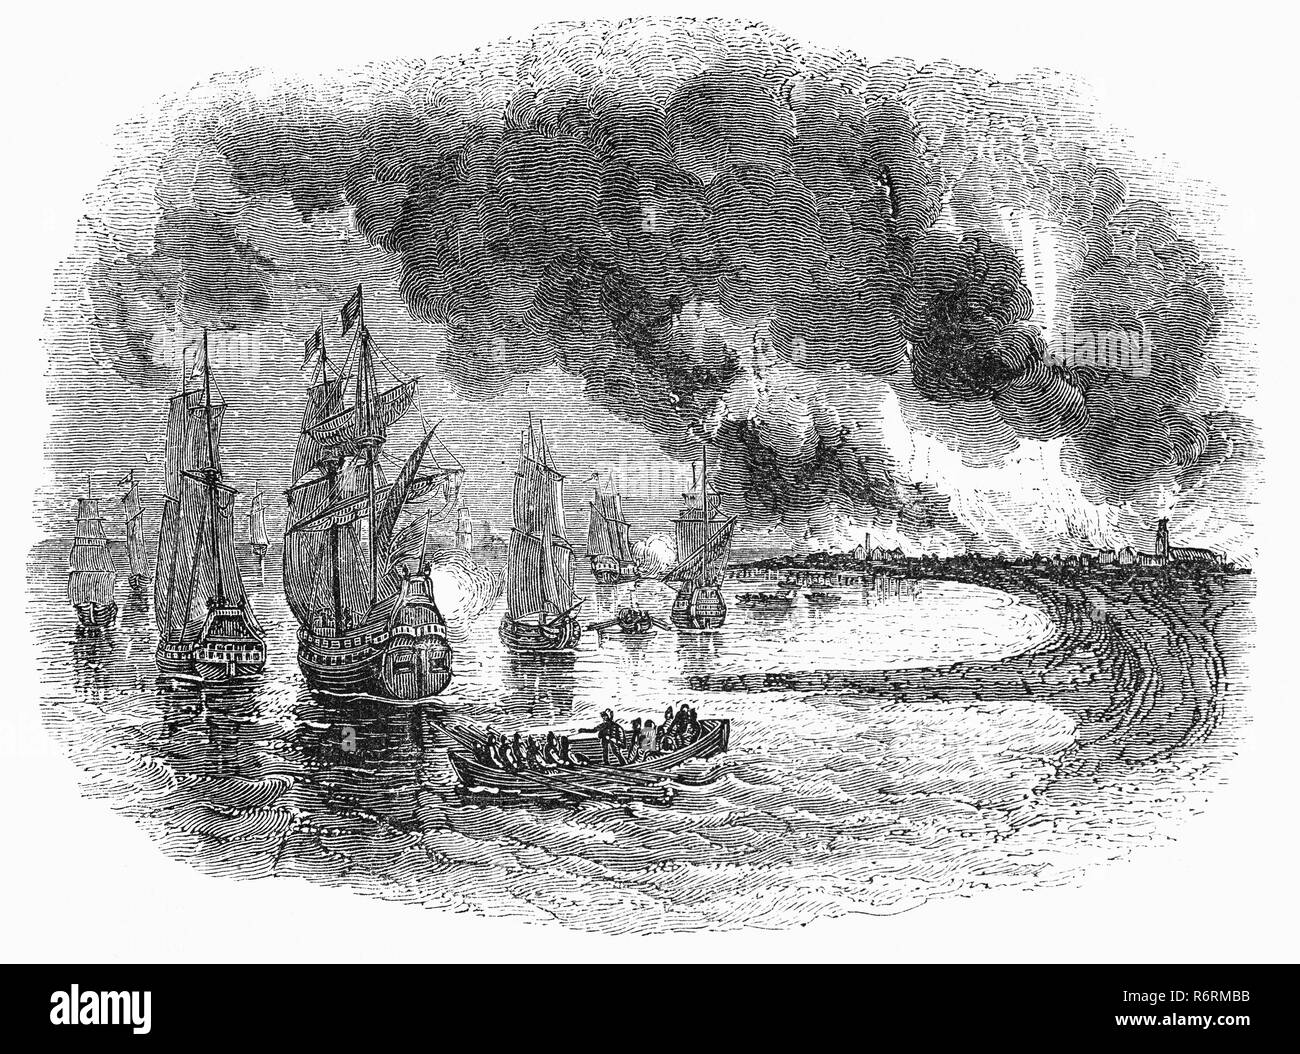 The Raid on the Medway, during the Second Anglo-Dutch War in June 1667, was a successful attack conducted by the Dutch navy on English battleships  when most were virtually unmanned and unarmed, laid up in the fleet anchorages off Chatham Dockyard and Gillingham in the county of Kent.  The Dutch captured the town of Sheerness, then sailed into the River Medway to Chatham and Gillingham, where they engaged fortifications with cannon fire, burned or captured three capital ships and ten more ships of the line, and captured and towed away the flagship of the English fleet, HMS Royal Charles. Stock Photo